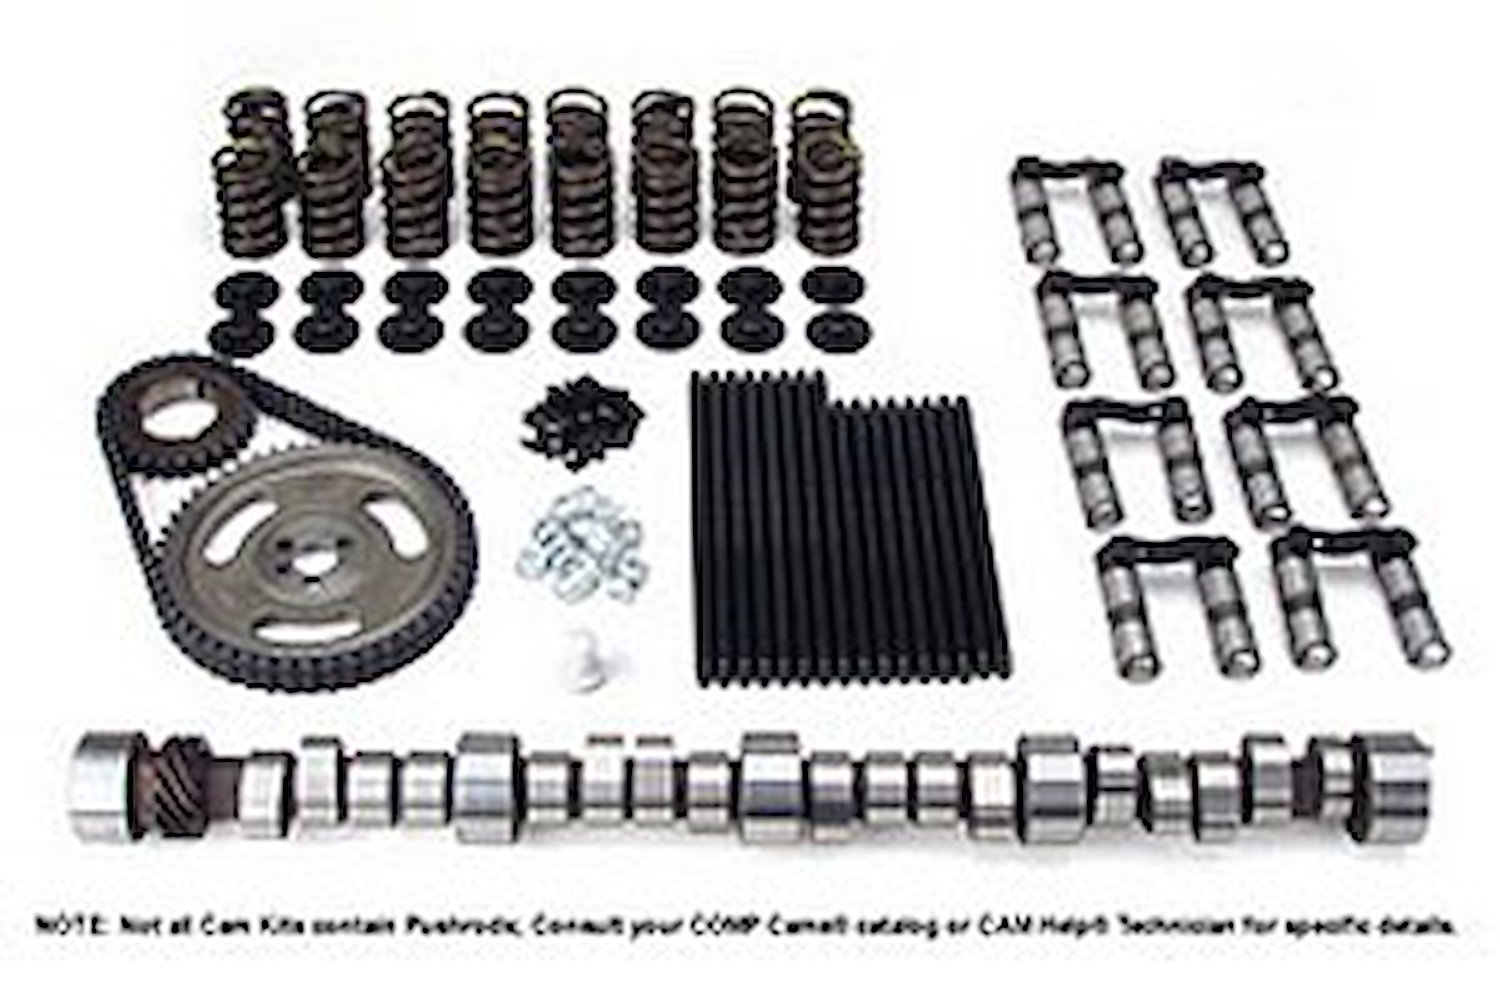 Nitrous HP Hyd. Roller Cam Complete Kit Chevy Big Block 396-454ci 1965-96 Retro-Fit Lift: .537"/.541"